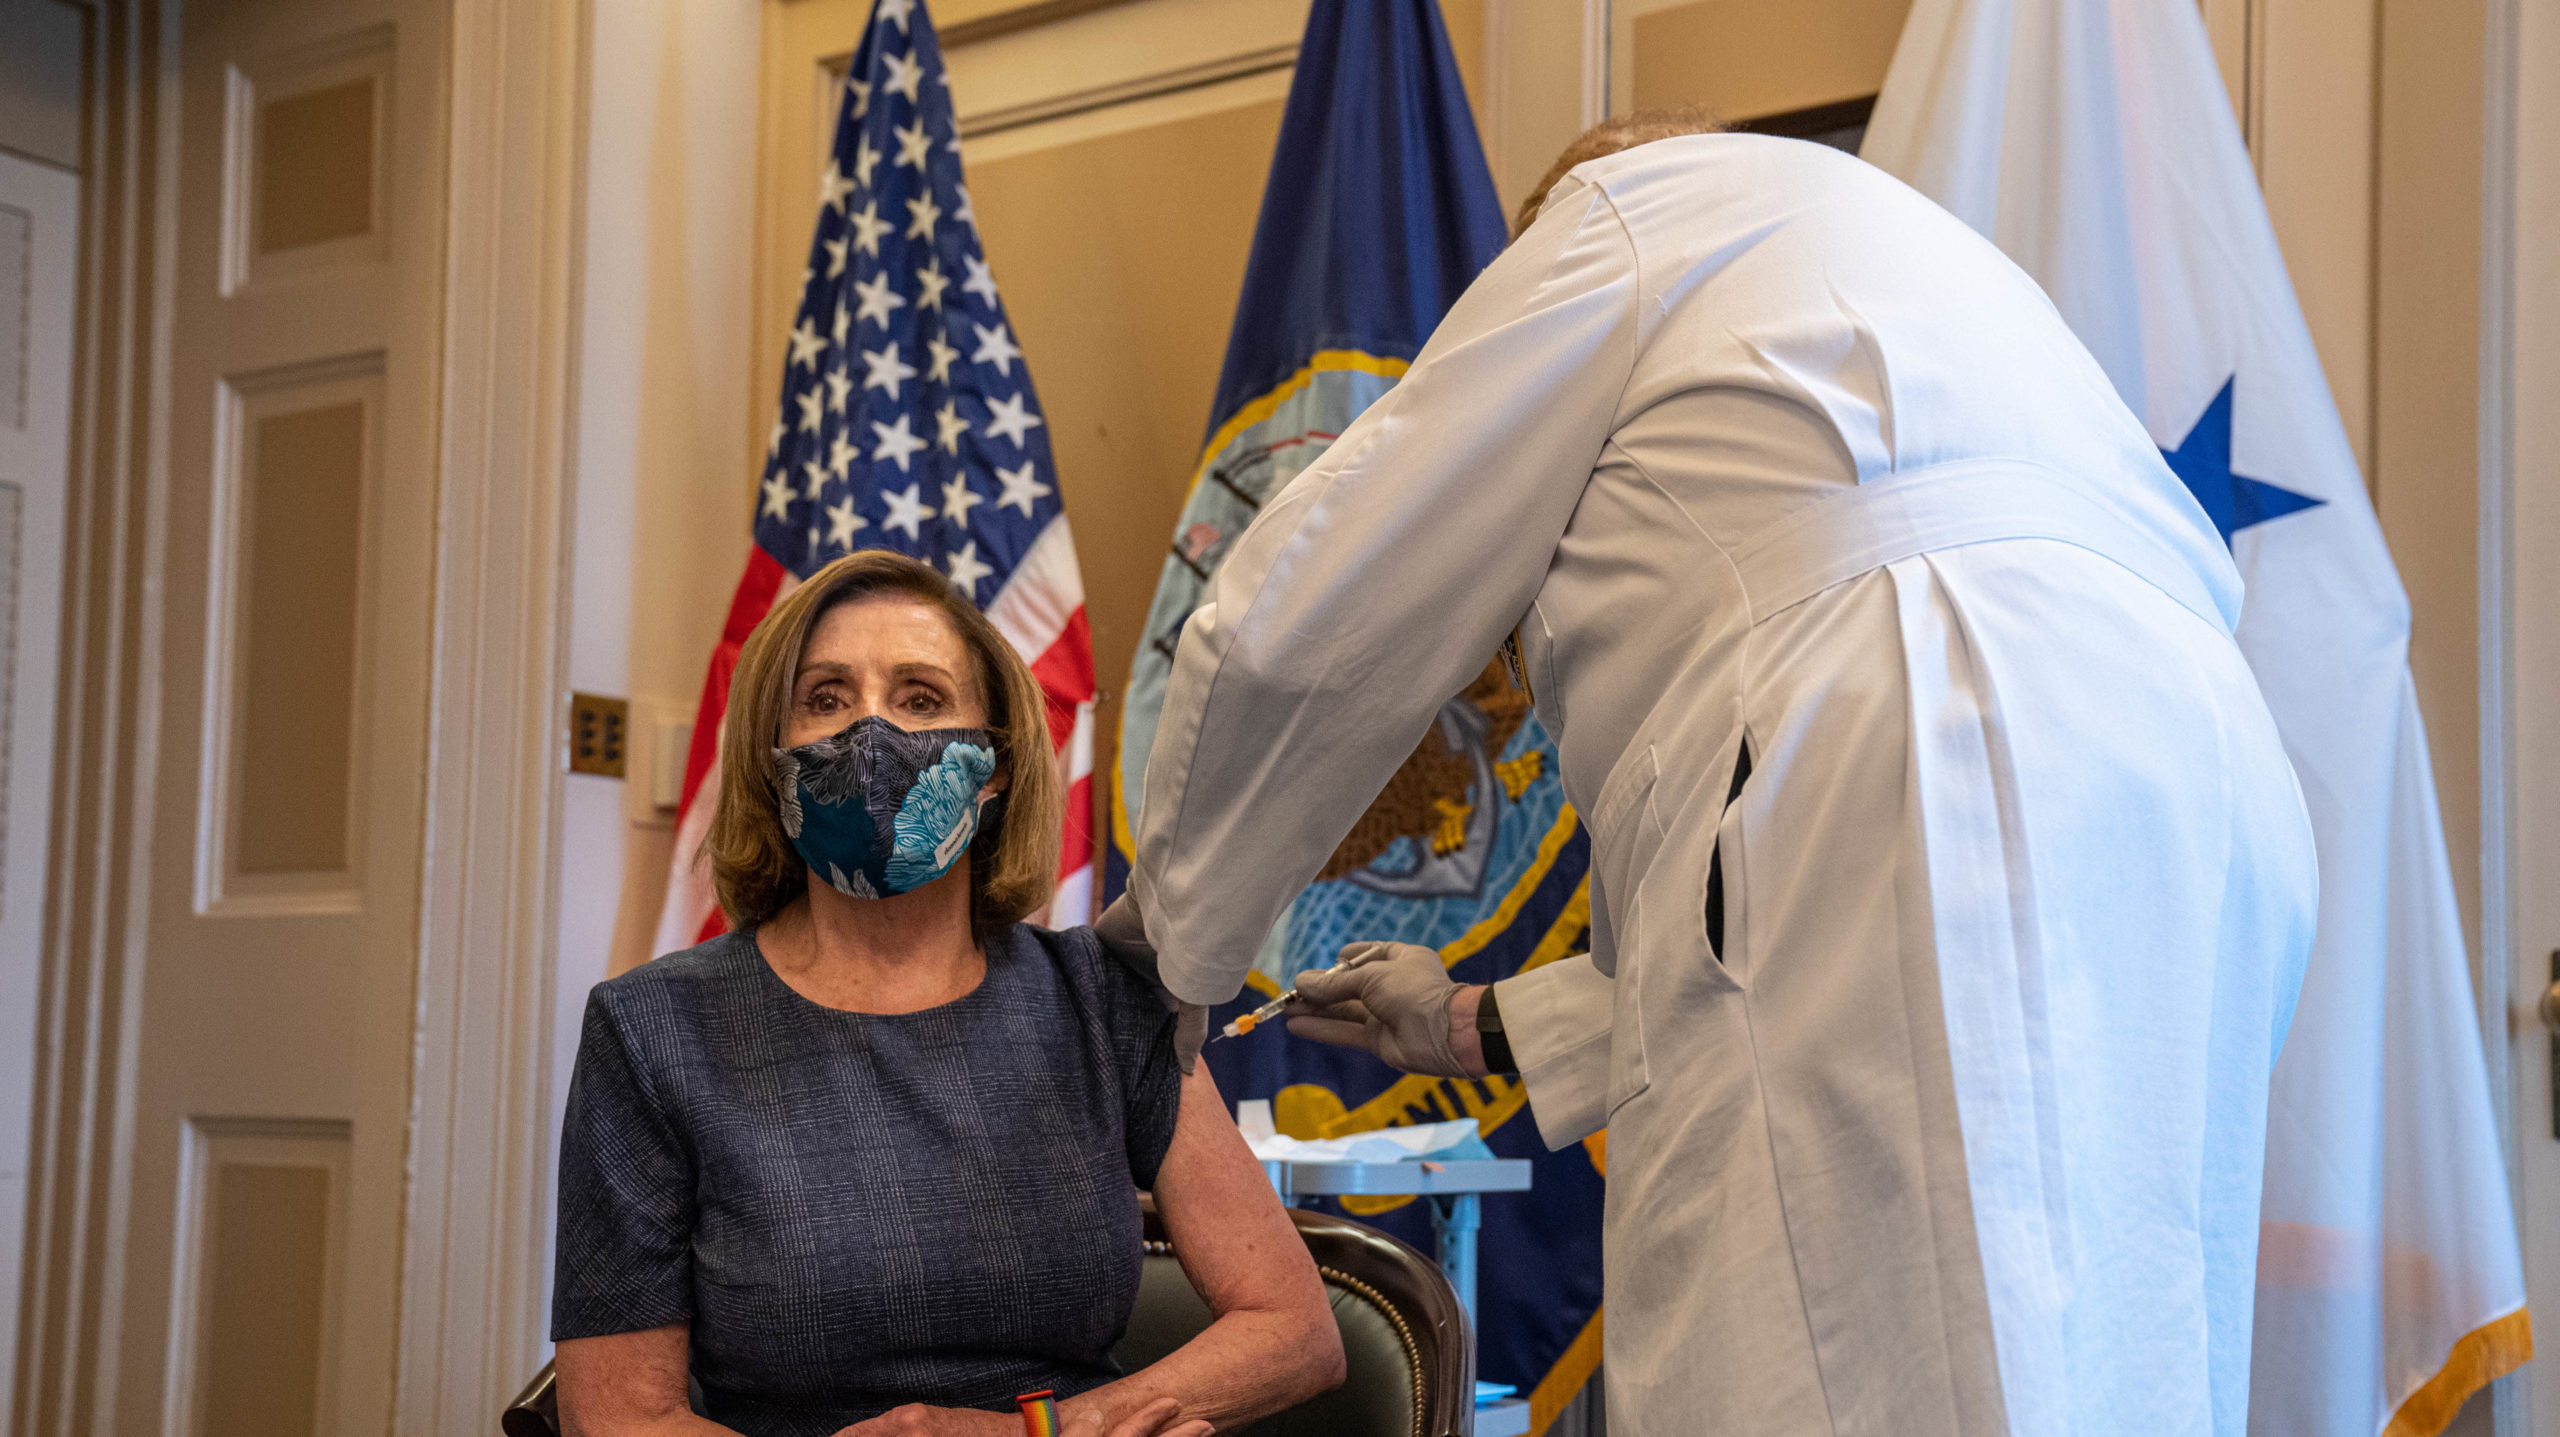 Speaker of the House Nancy Pelosi (D-CA) receives a covid-19 vaccination shot by doctor Brian Monahan, attending physician of the United States Congress, in her office in Washington, D.C., on December 18, 2020. (Photo: Ken Cedeno / various sources / AFP, Getty Images)